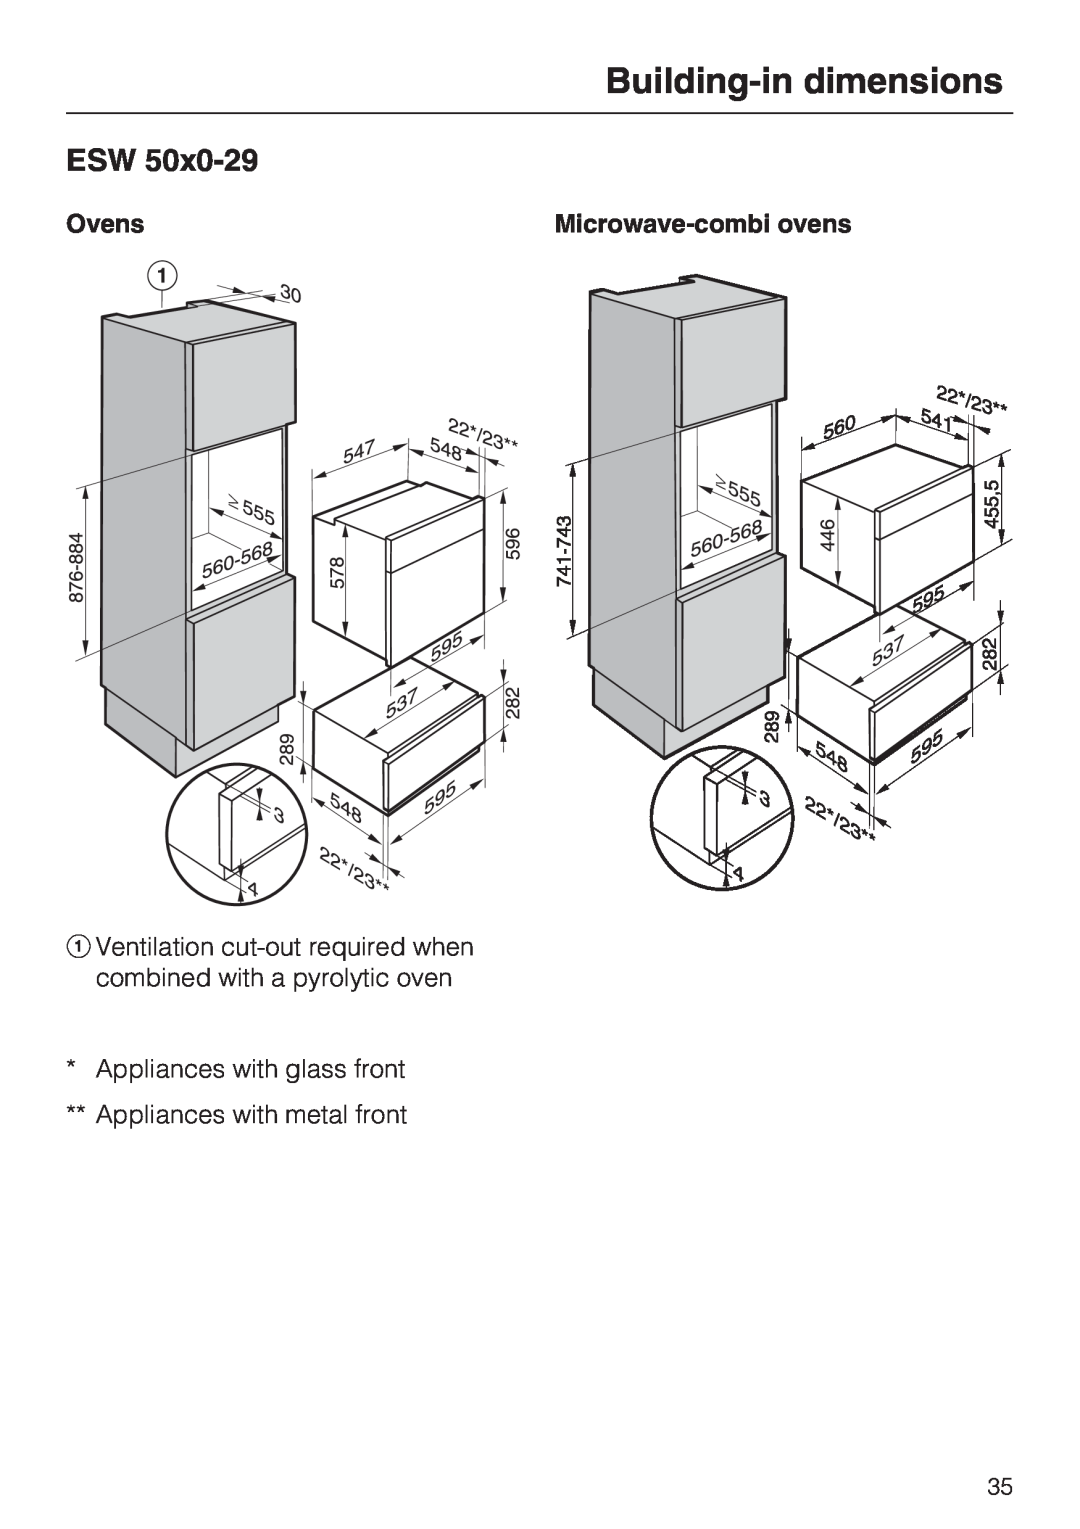 Miele ESW 50X0-29, ESW 50X0-14, ESW 5088-14 installation instructions Building-in dimensions, Ovens, Microwave-combi ovens 